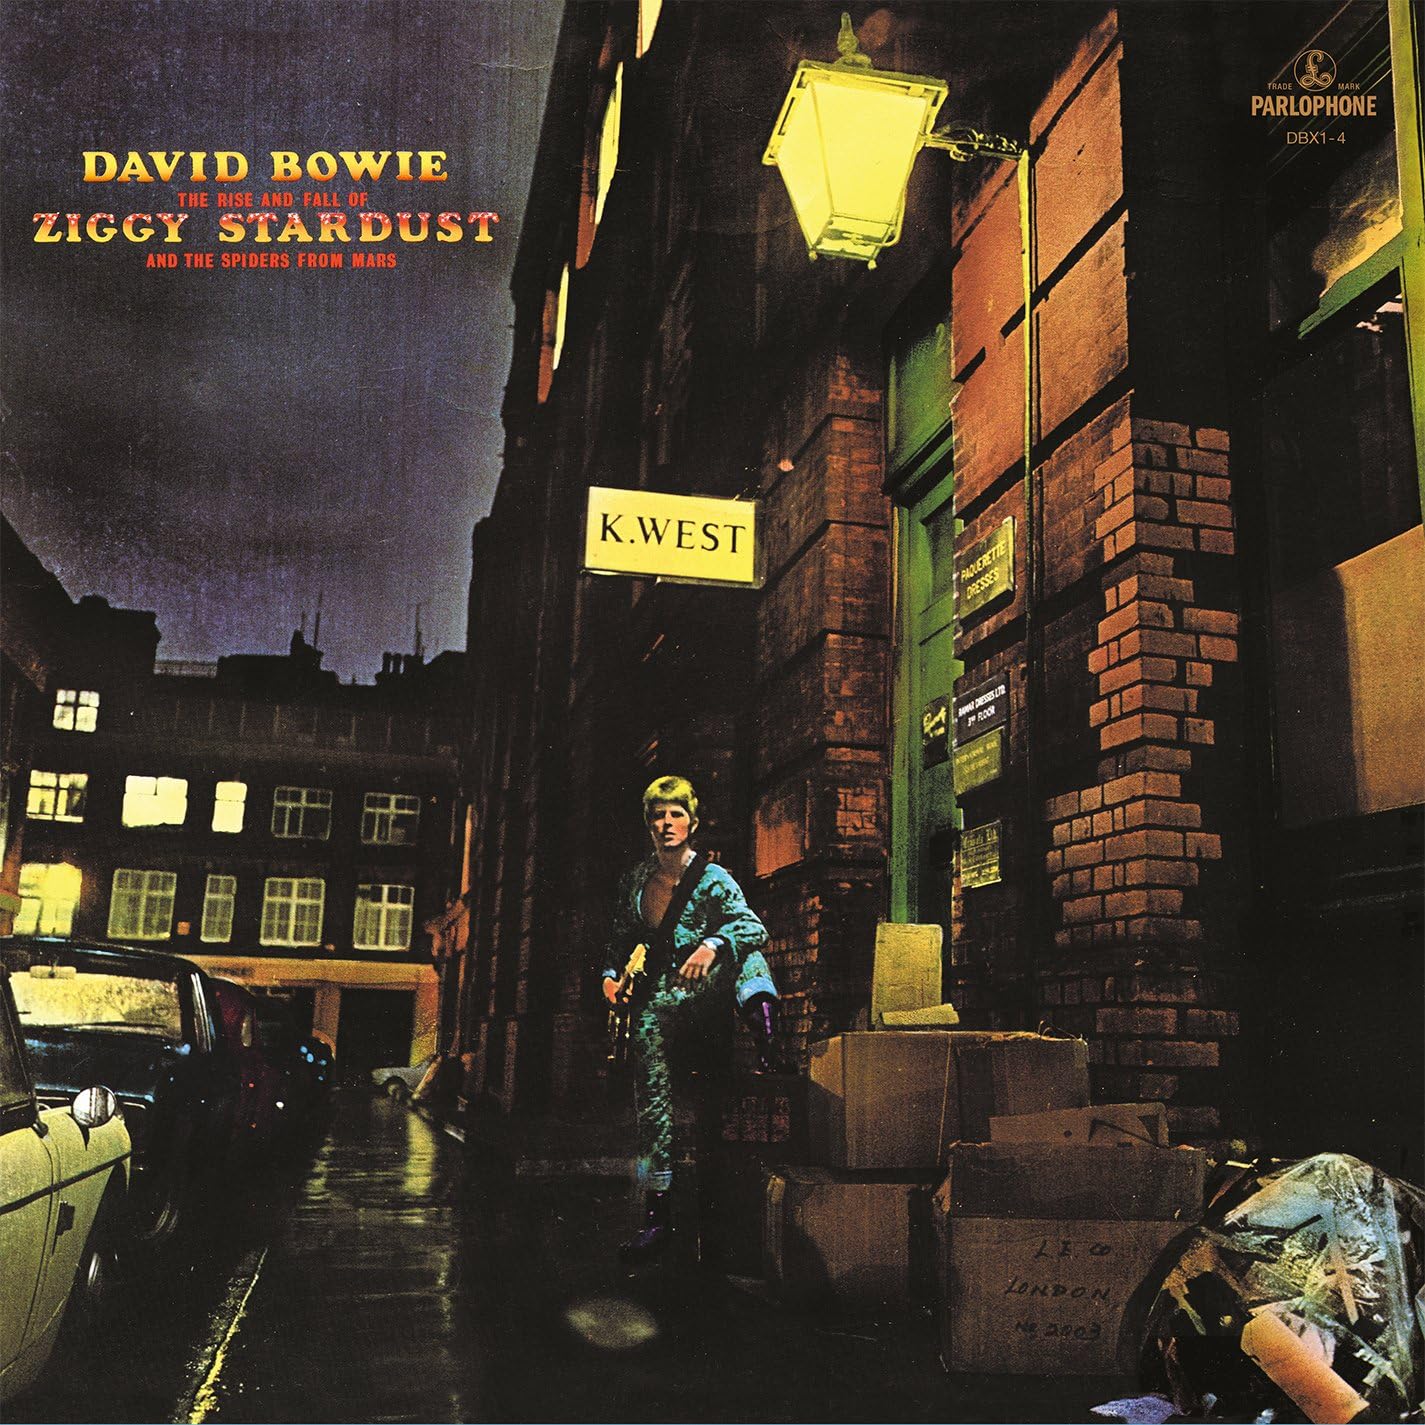 LP - David Bowie - The Rise and Fall of Ziggy Stardust and the Spiders from Mars